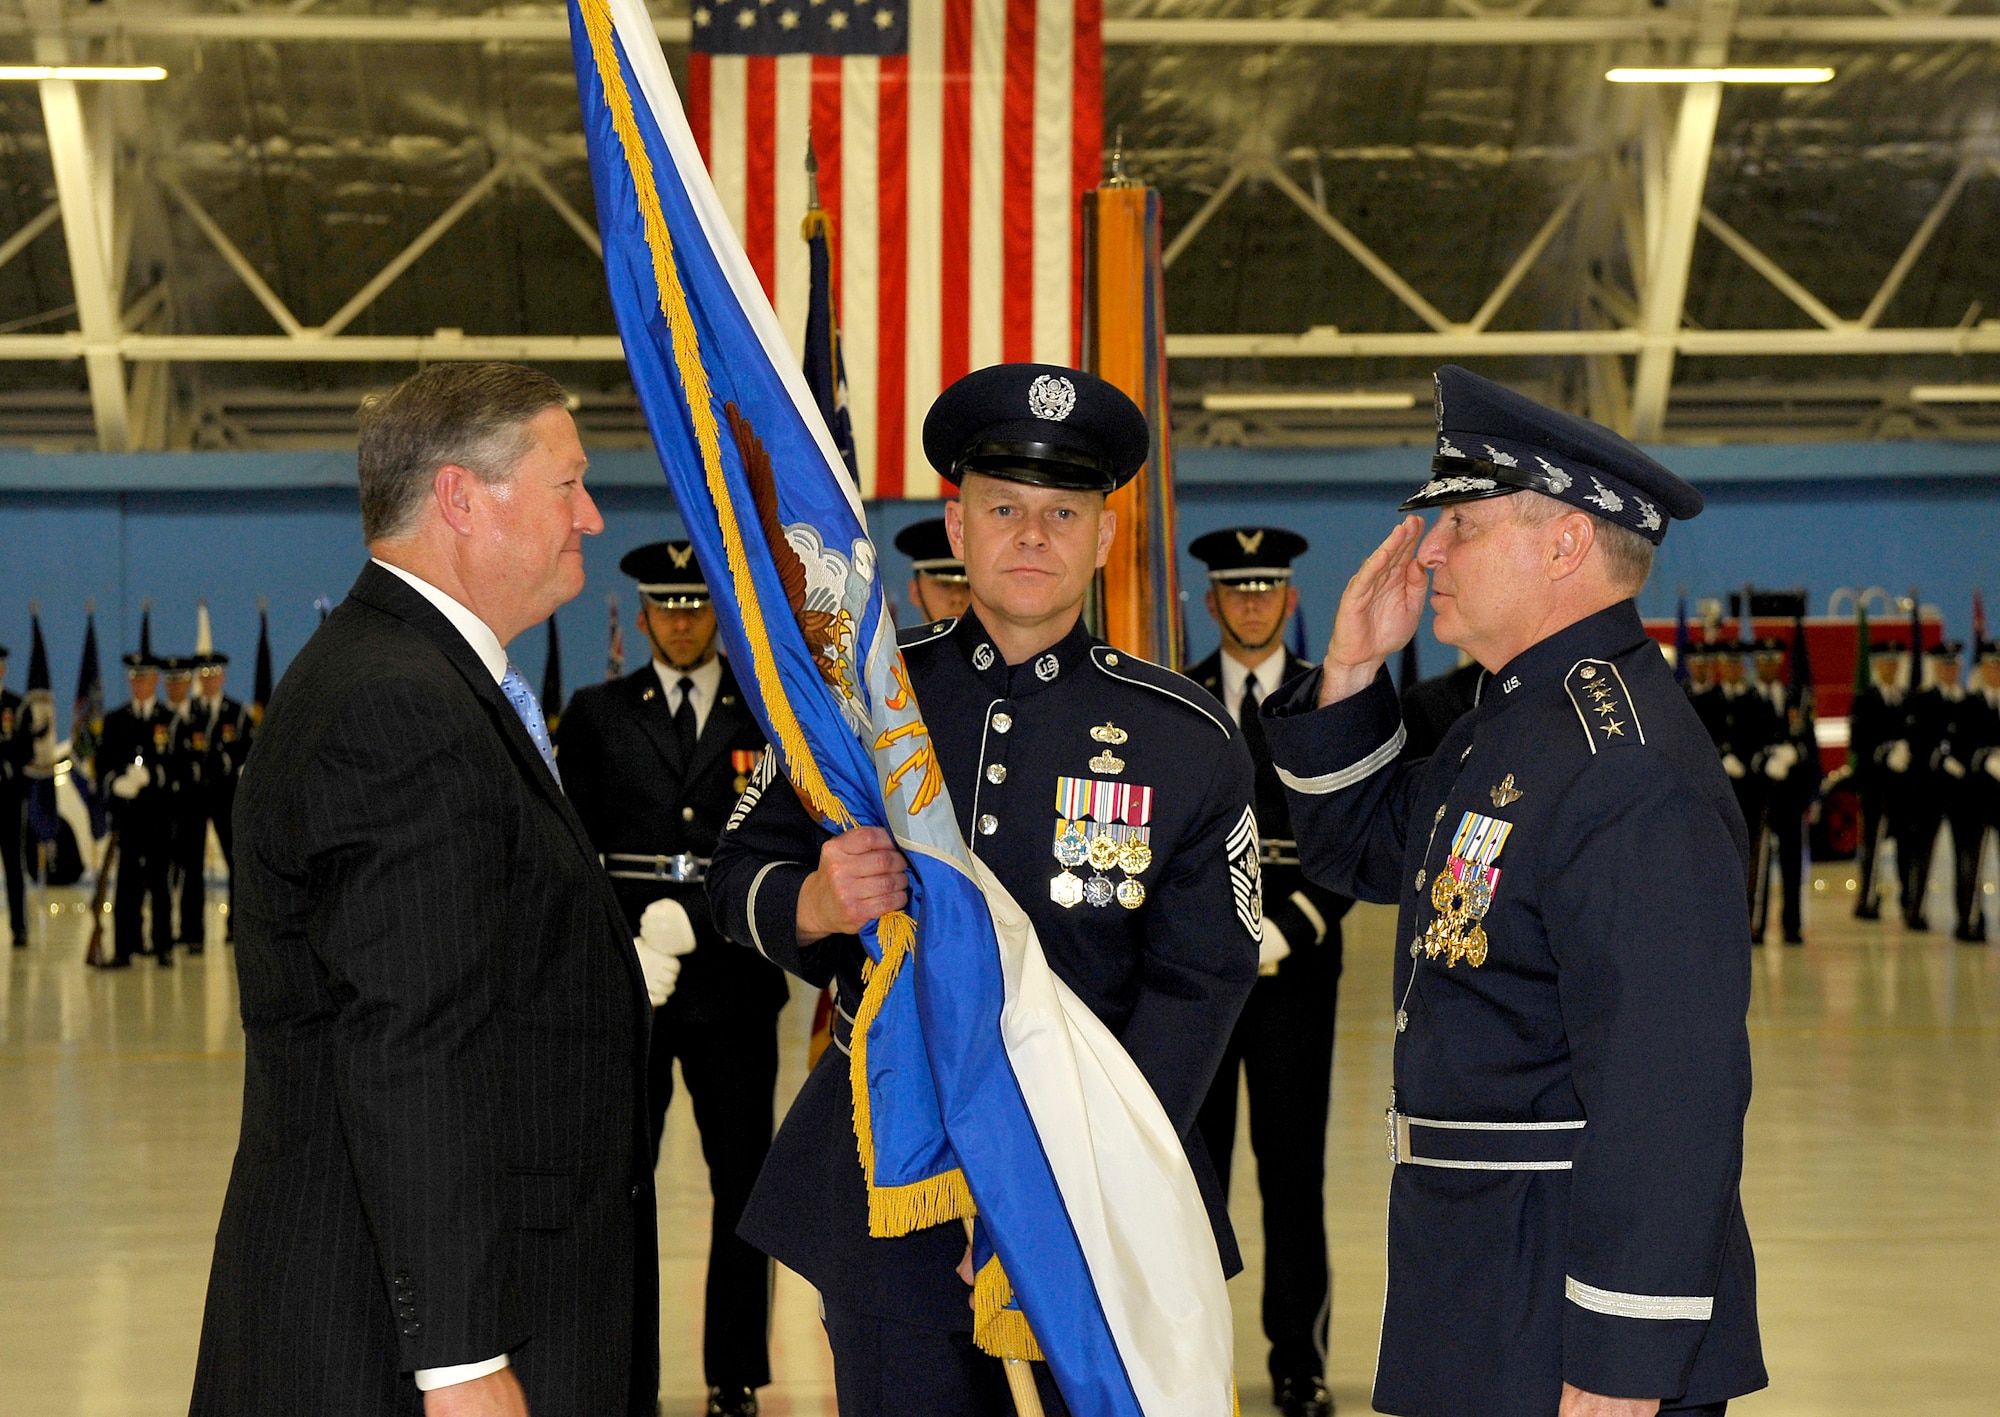 Secretary of the Air Force Michael Donley passes the chief of staff flag to Gen. Mark A. Welsh III during a ceremony at Joint Base Andrews, Md., Aug. 10, 2012. Prior to his new position, Welsh was the commander of U. S. Air Forces in Europe. (U.S. Air Force photo/ Michael J. Pausic)